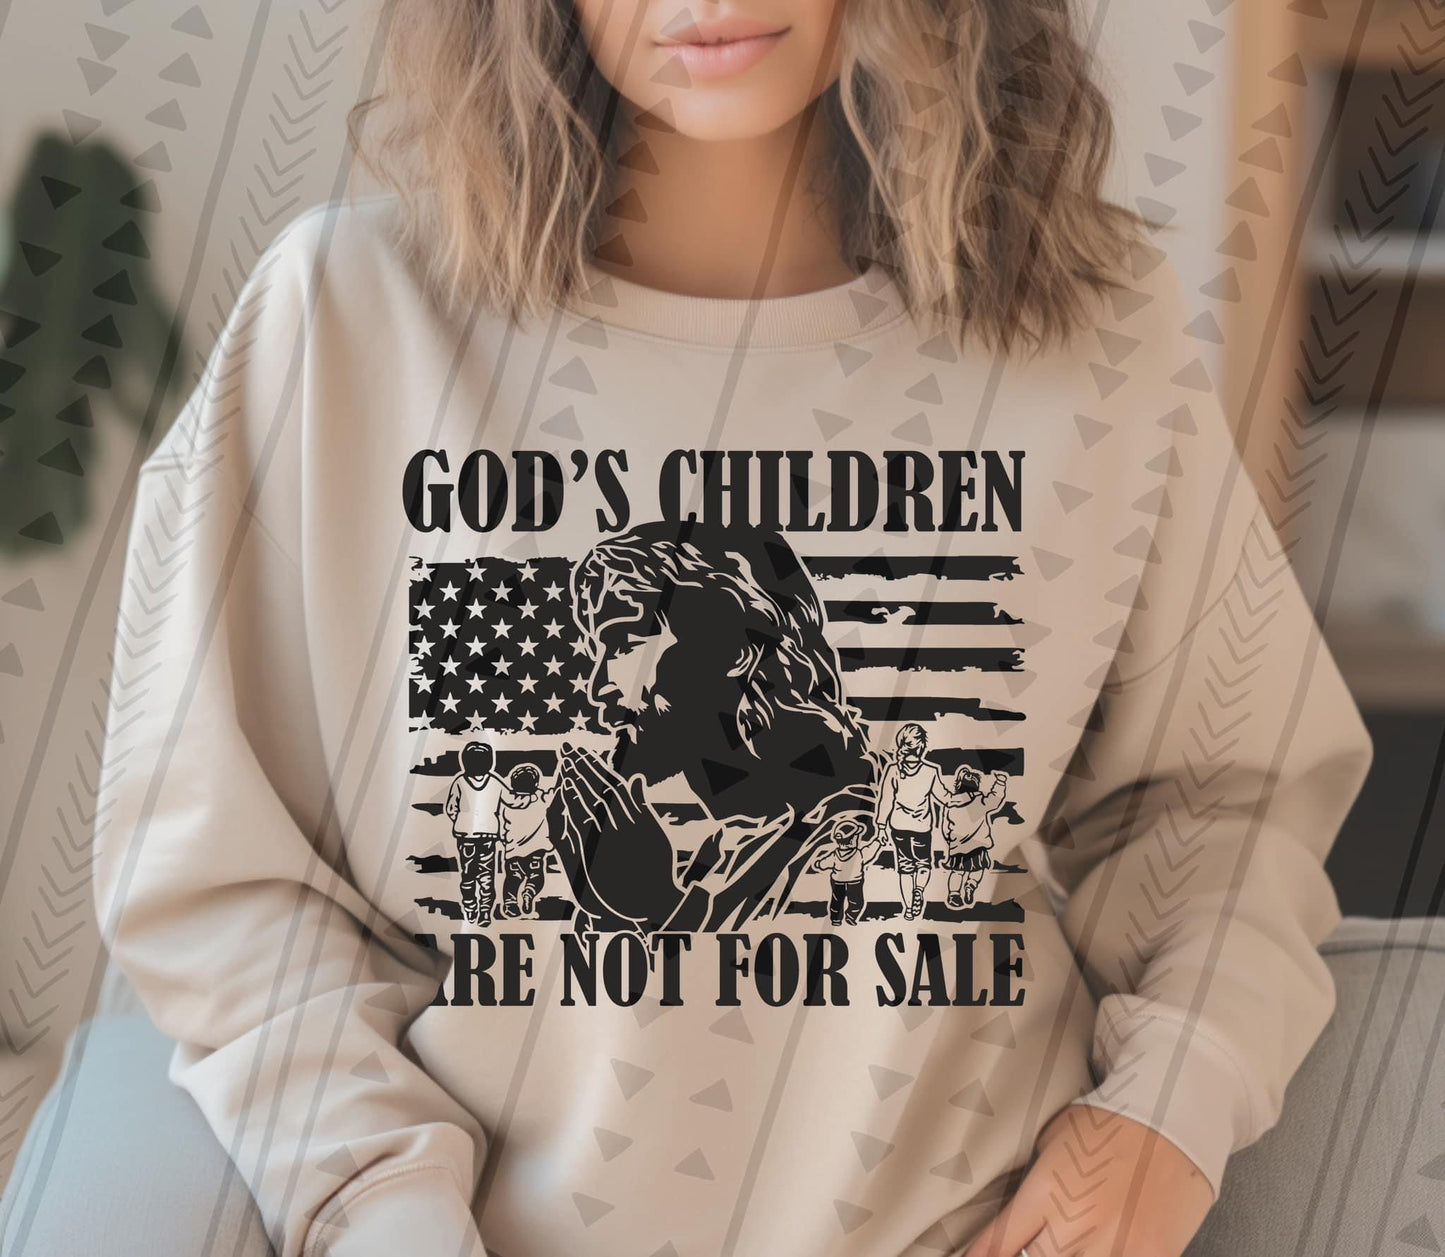 Gods children are not for sale